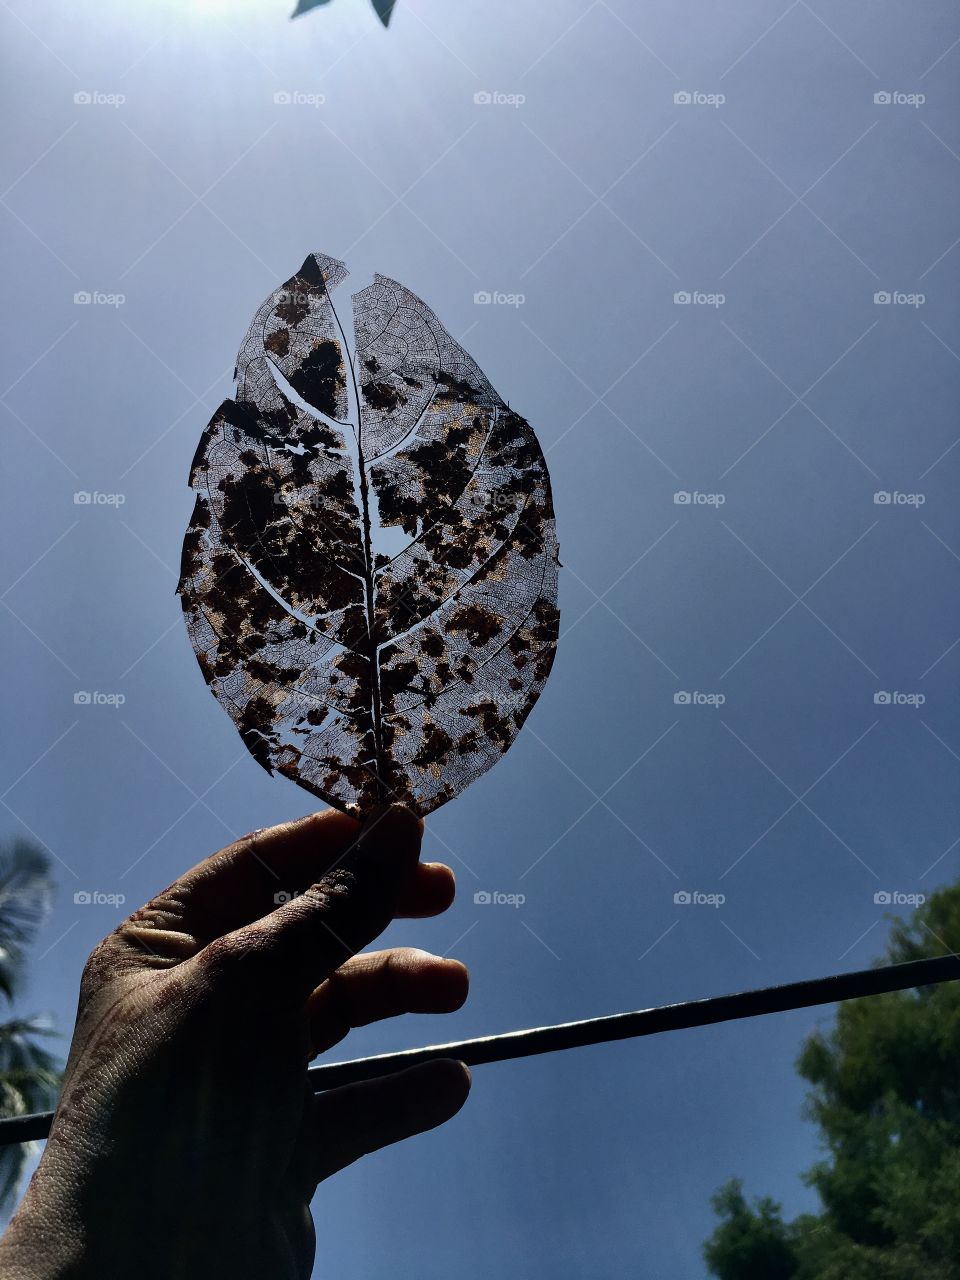 When i saw this leaf then am in love with this and my camera was on ..I click it 